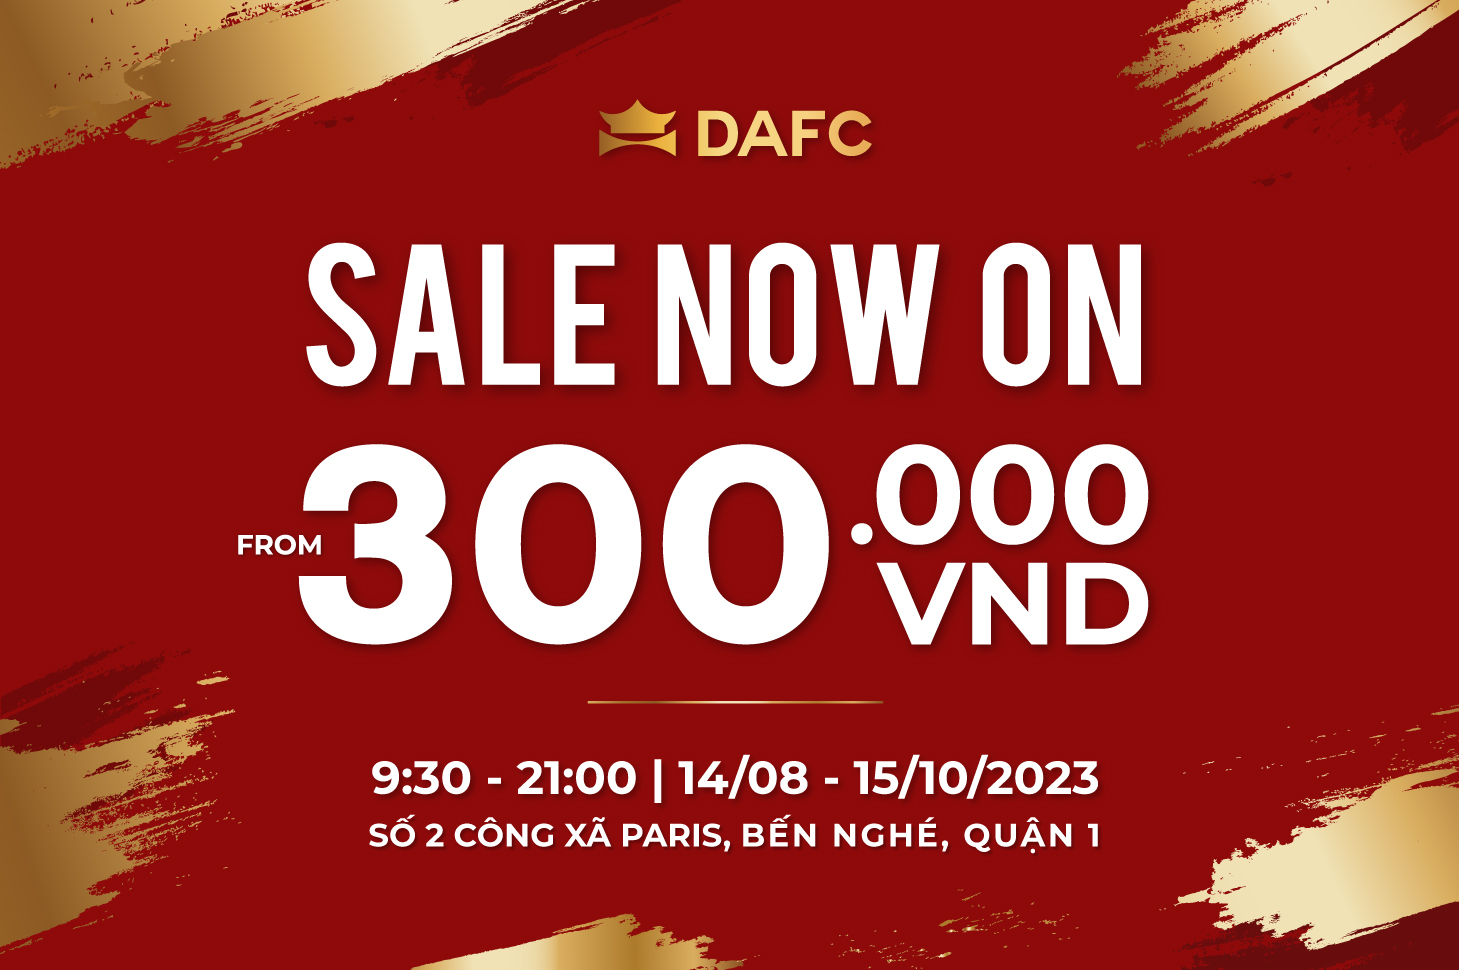 DAFC outlet sale